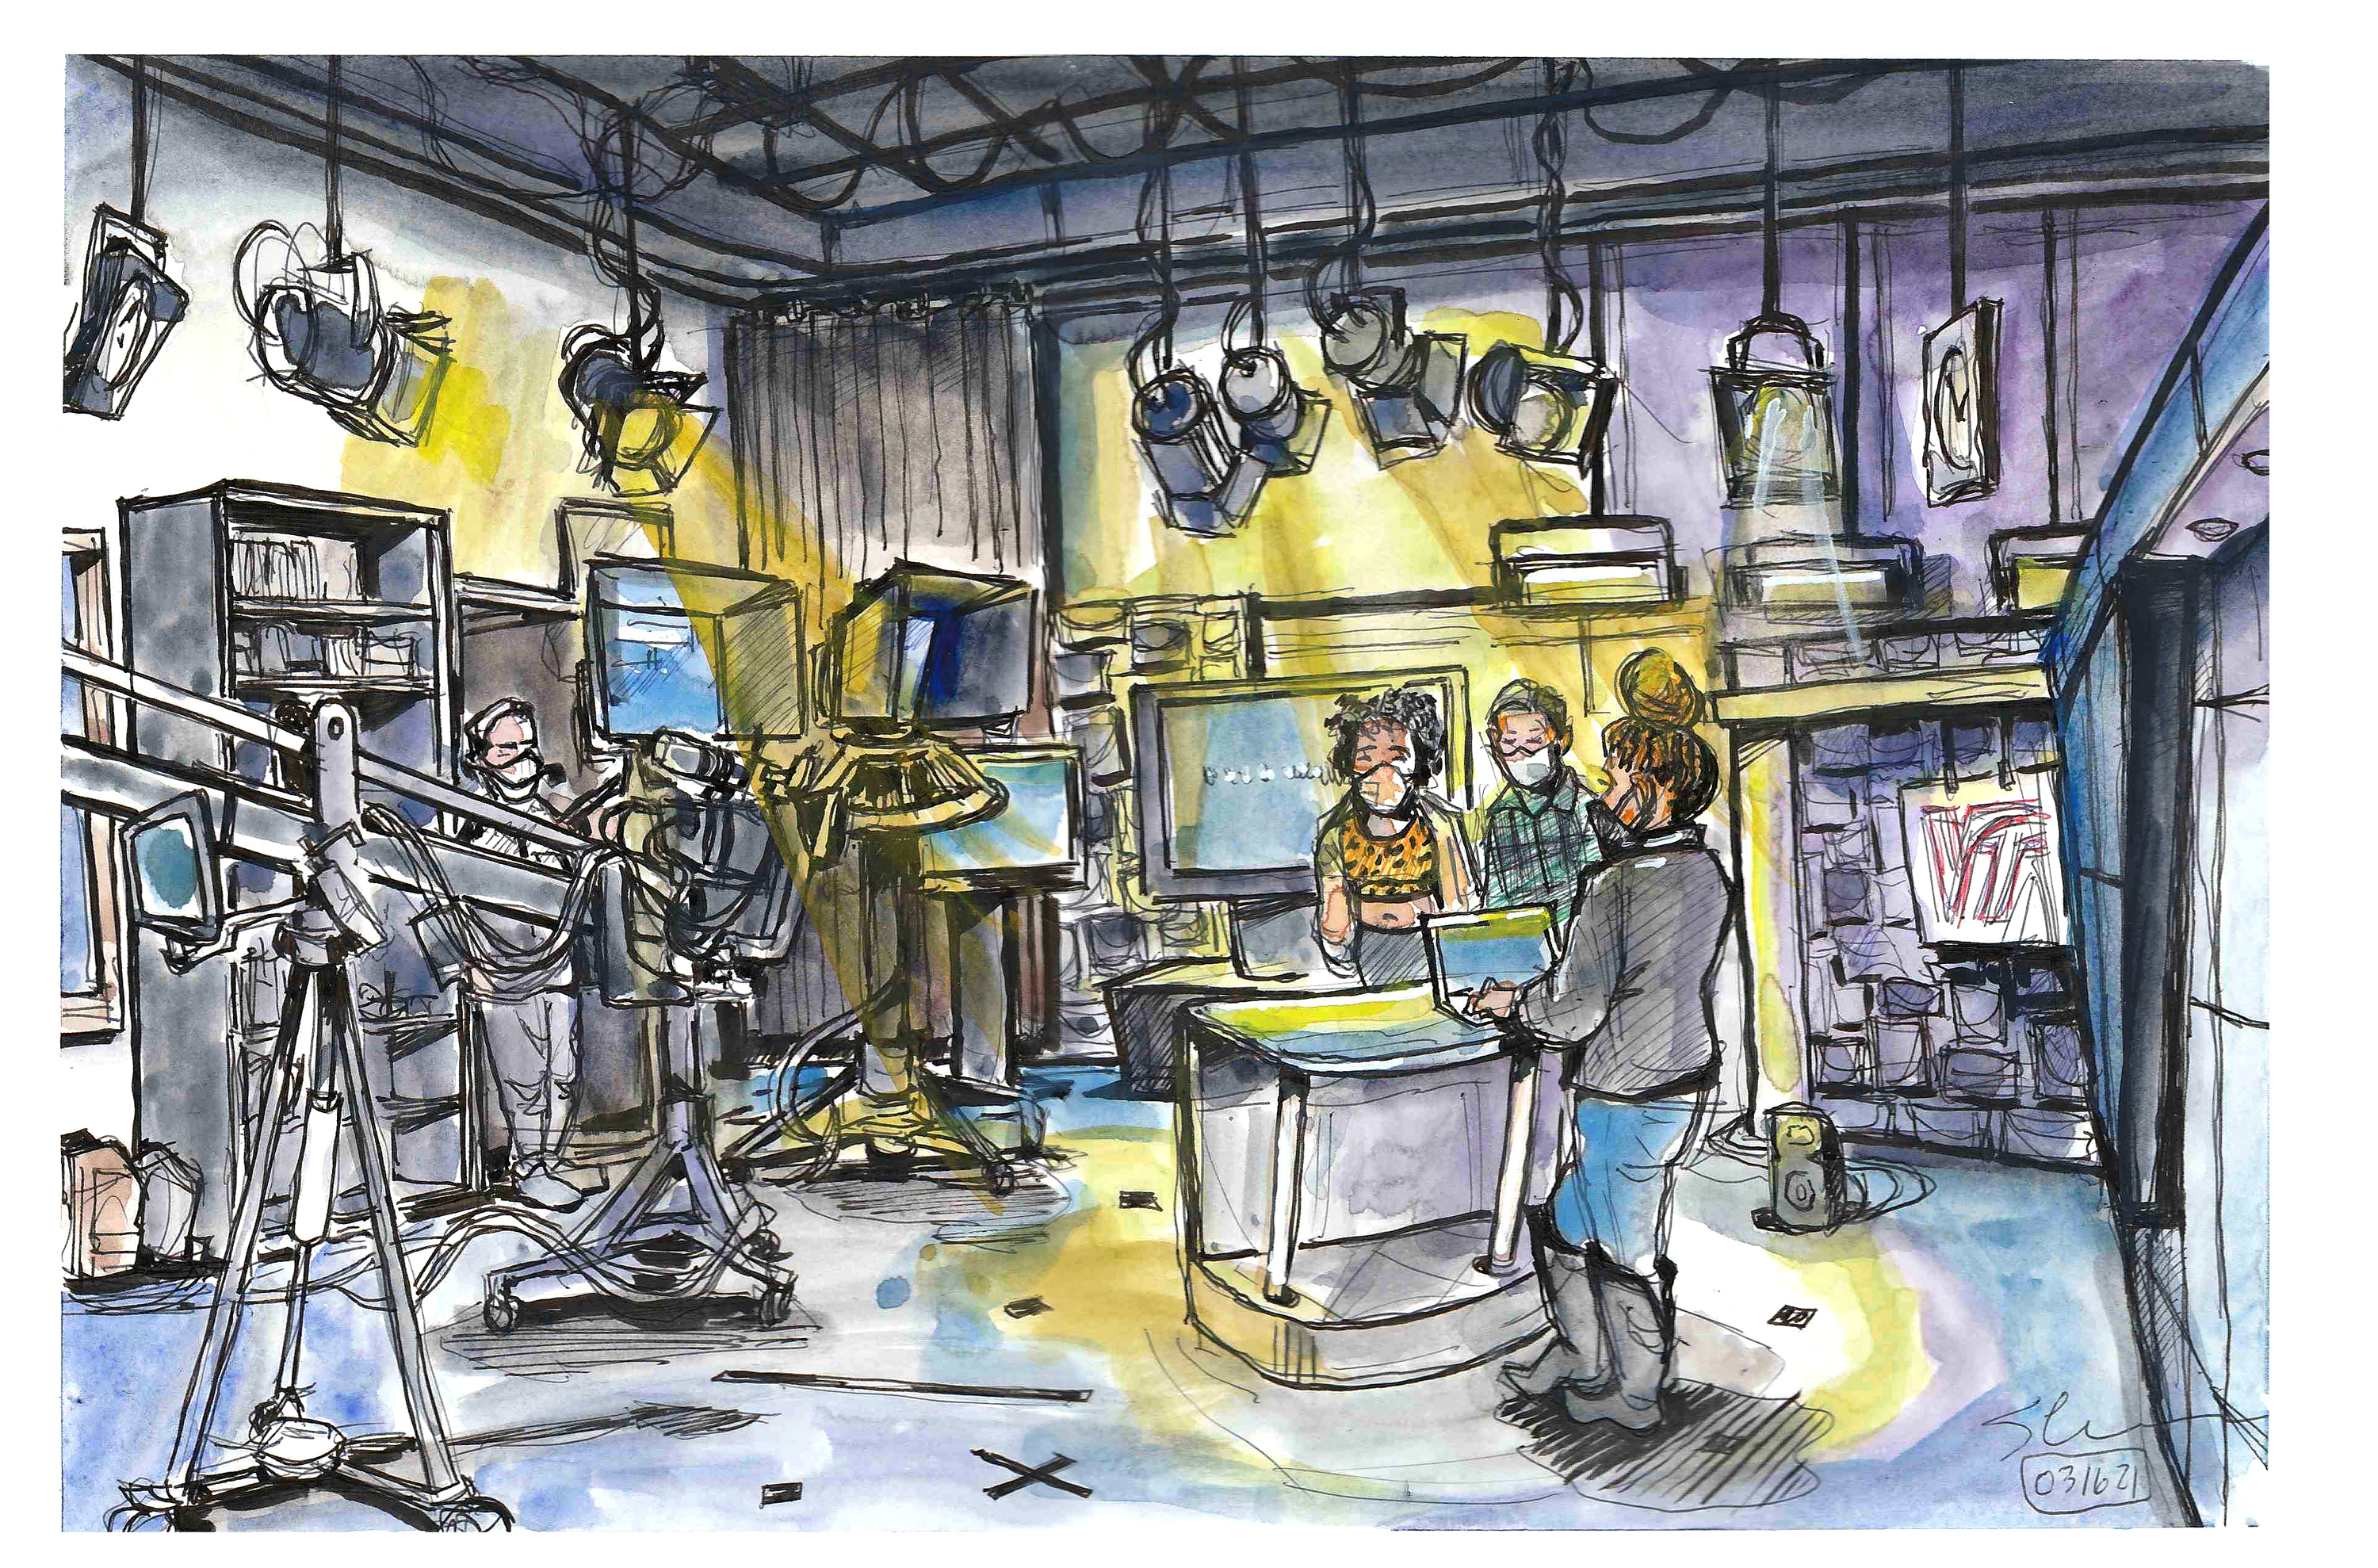 Illustration in ink and watercolor of the Comm School Studio